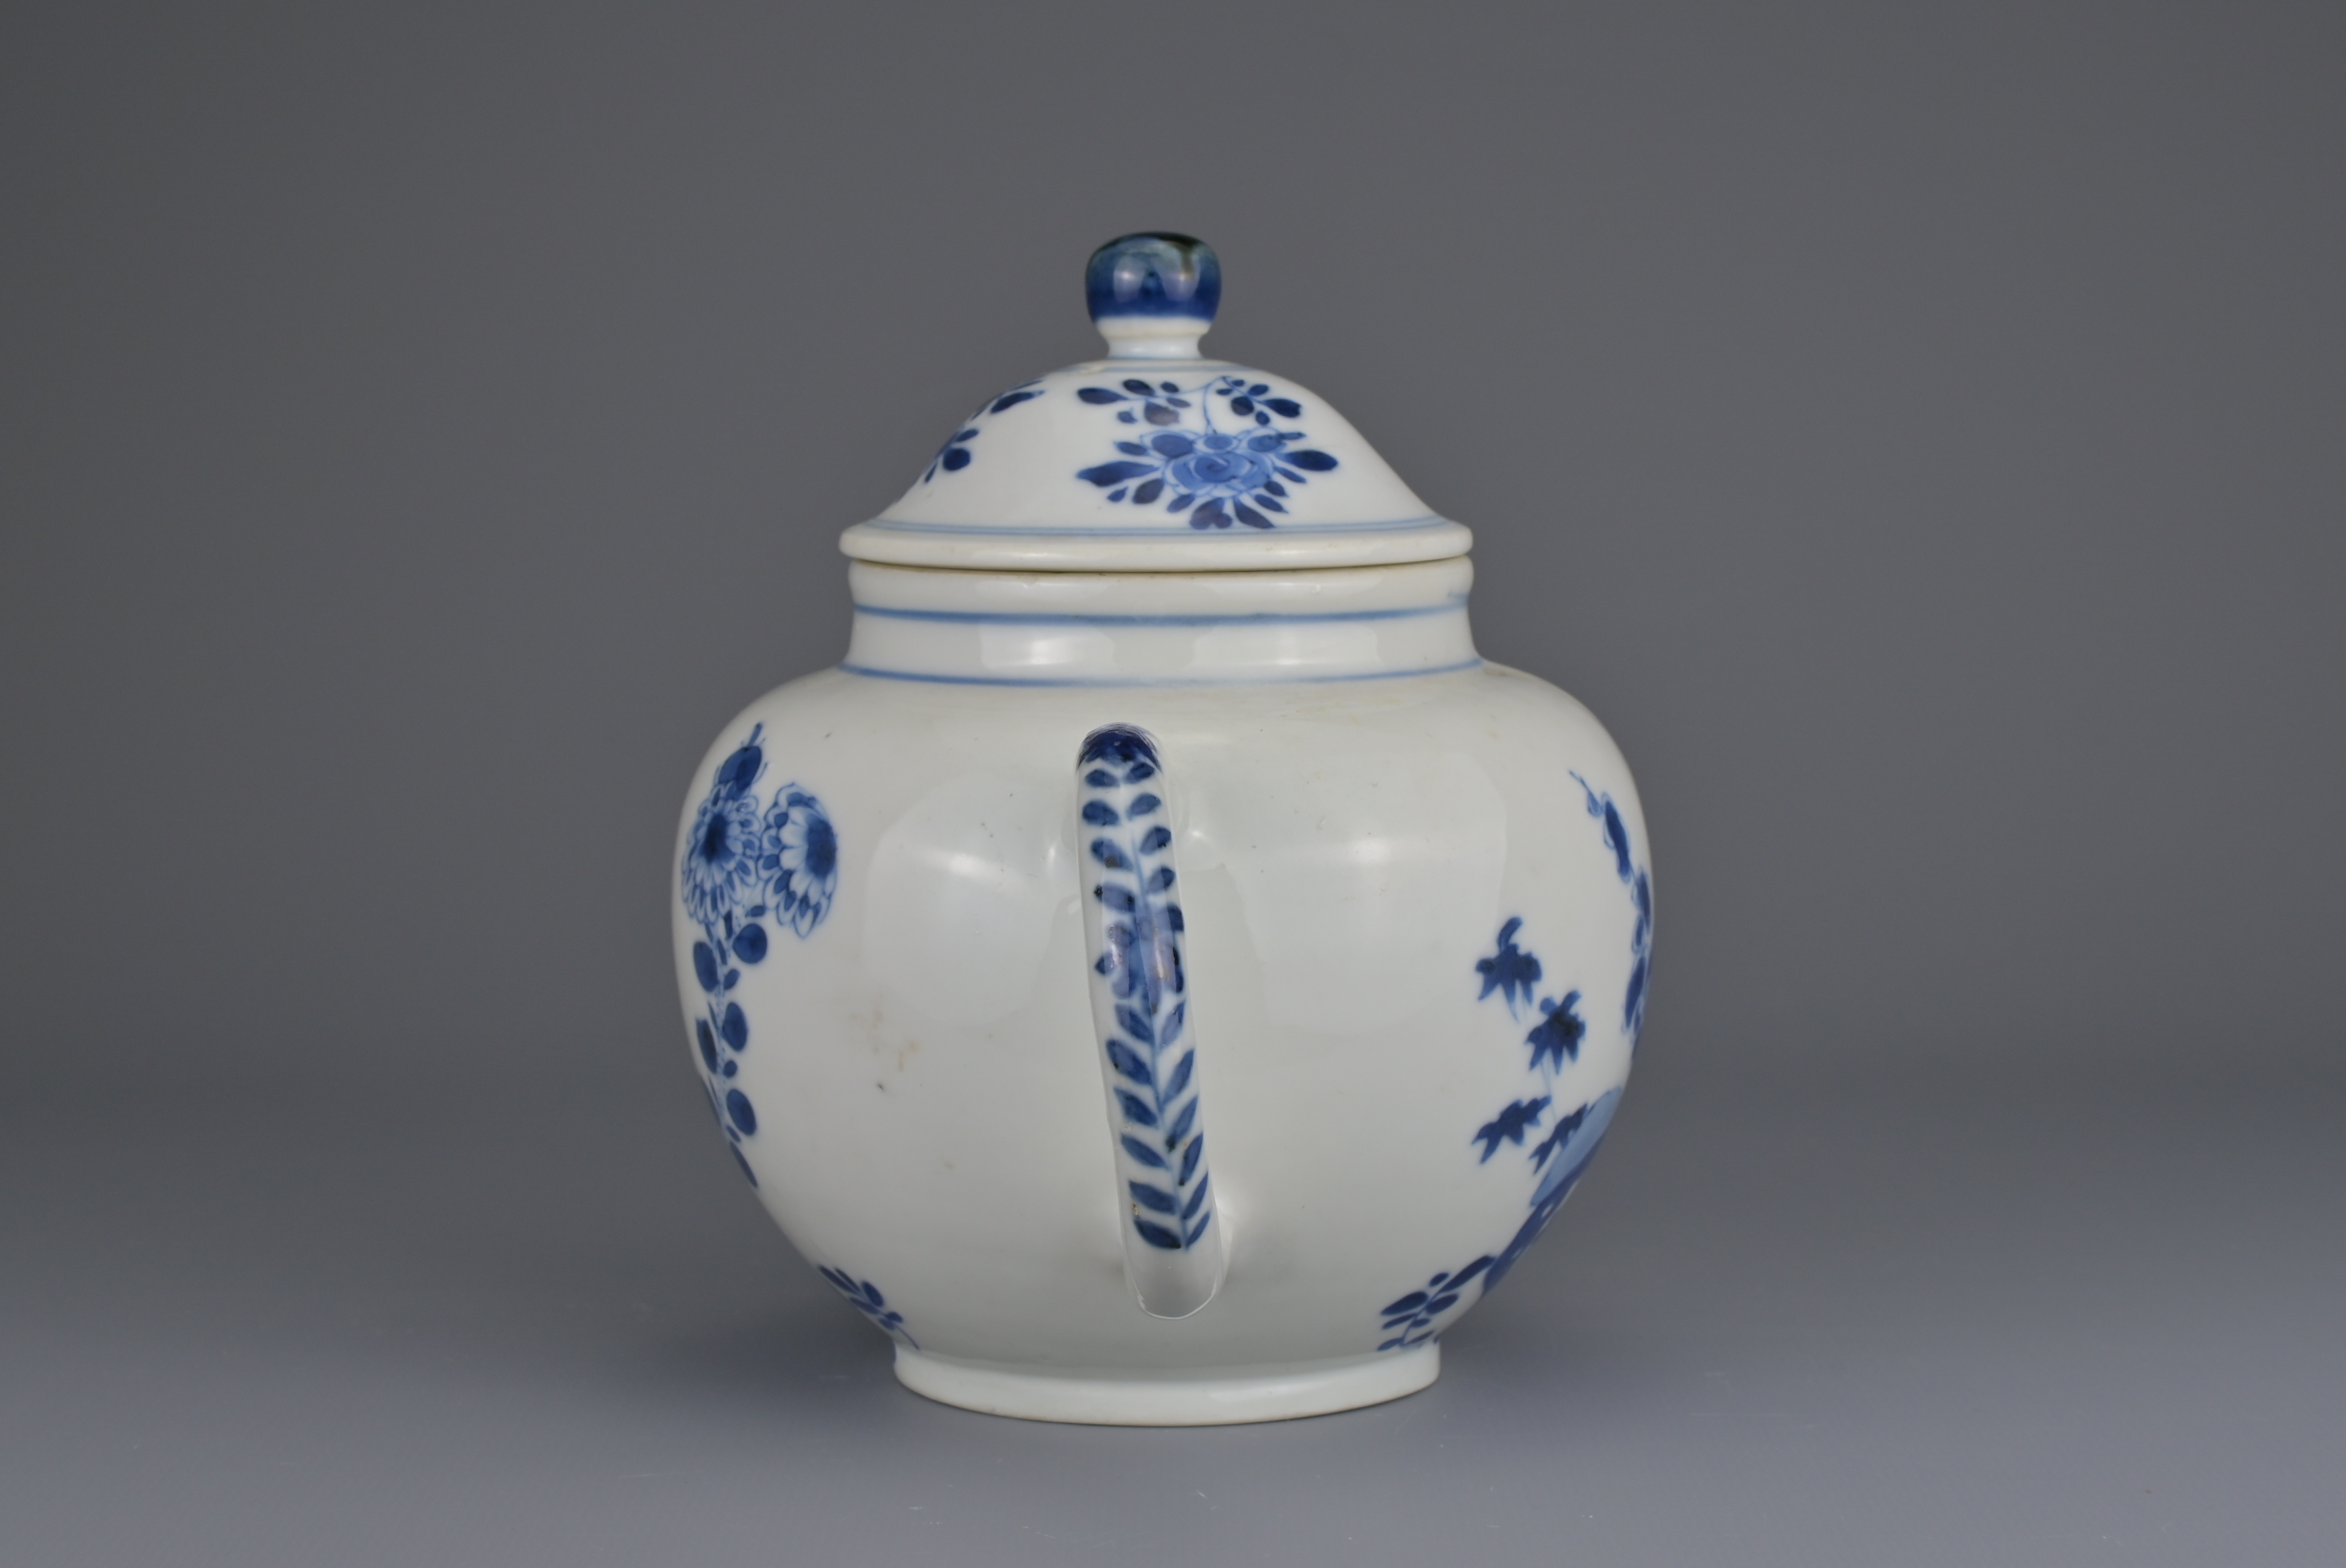 CHINESE BLUE AND WHITE PORCELAIN TEAPOT, YONGZHENG PERIOD, 18th CENTURY - Image 3 of 8